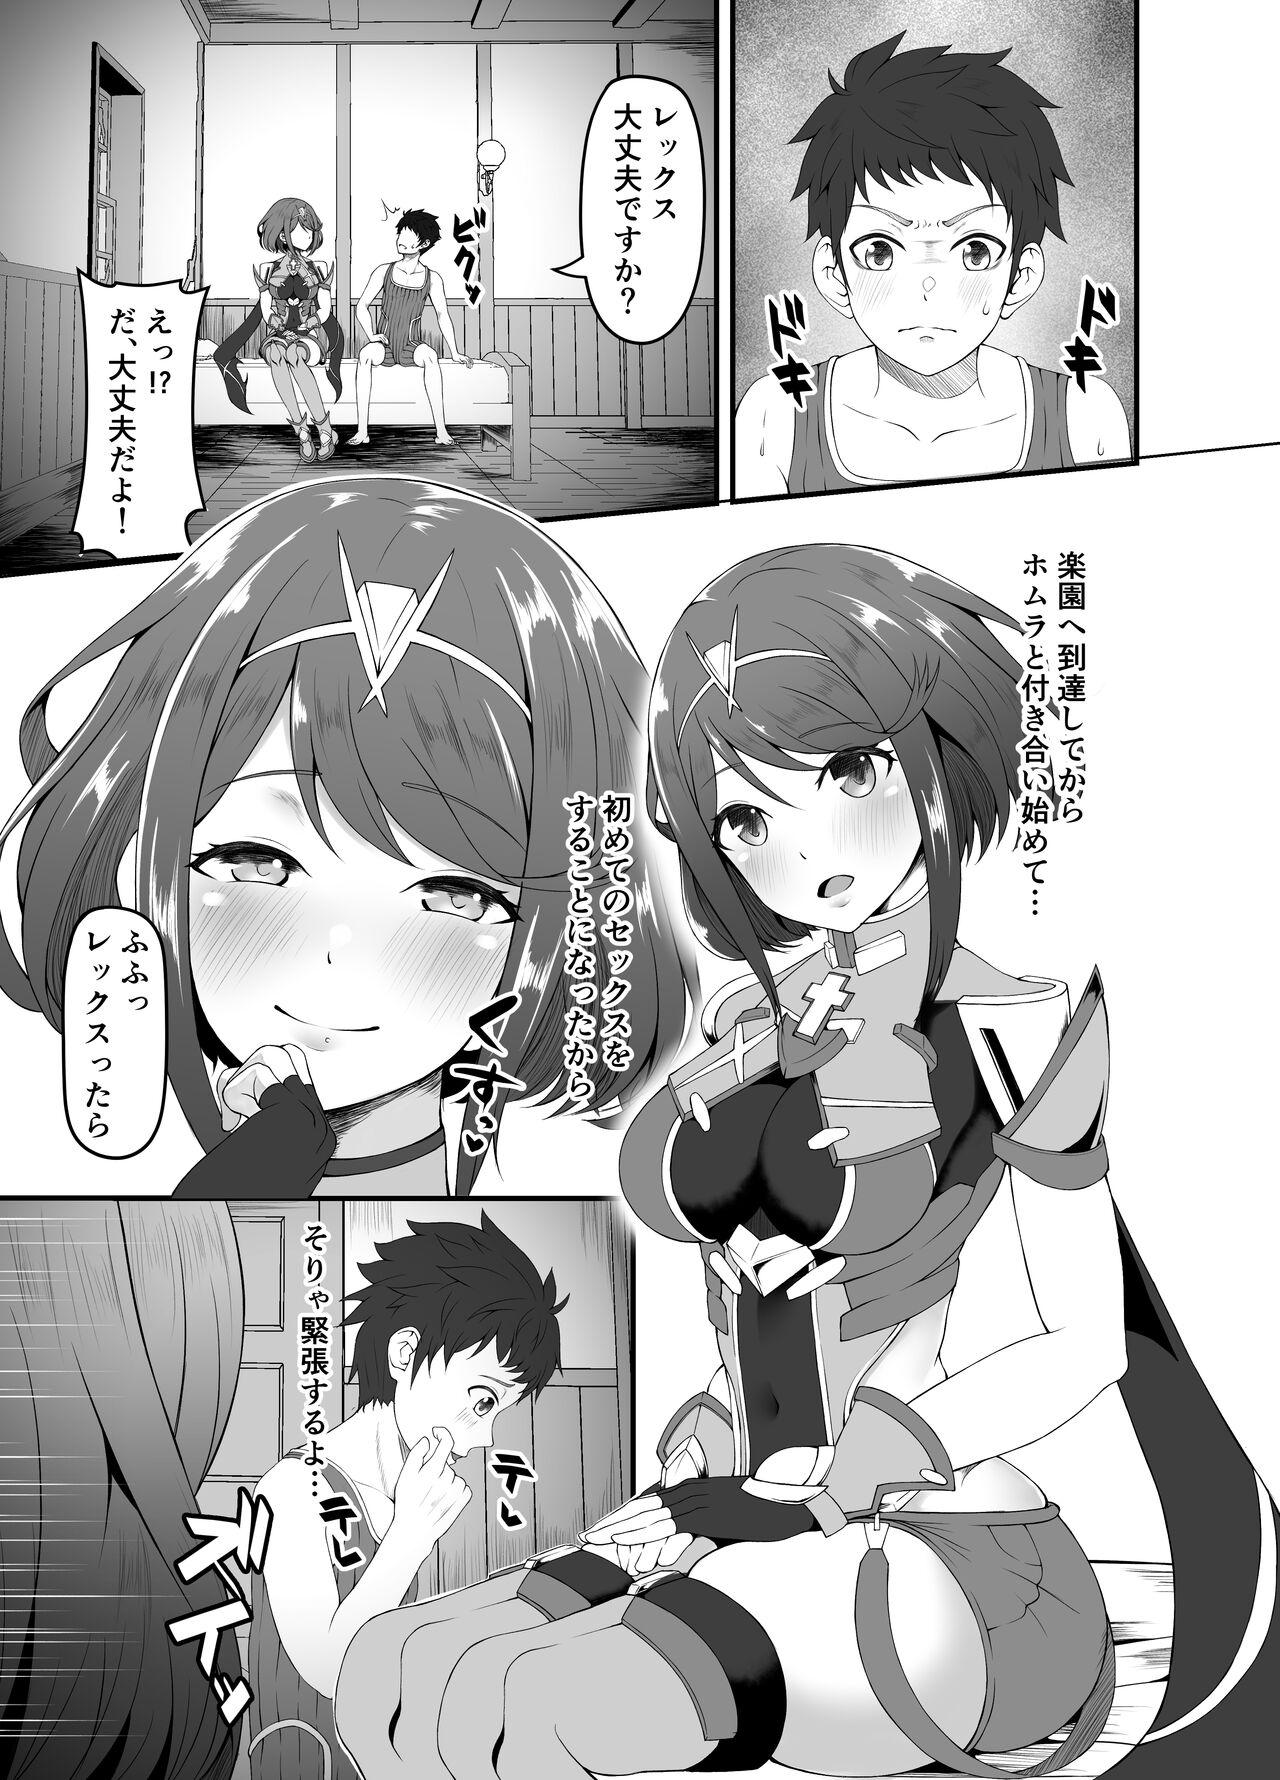 Flaquita 【ゼノブレ2】君と初めて繋がる日 - Xenoblade chronicles 2 Suck Cock - Page 3